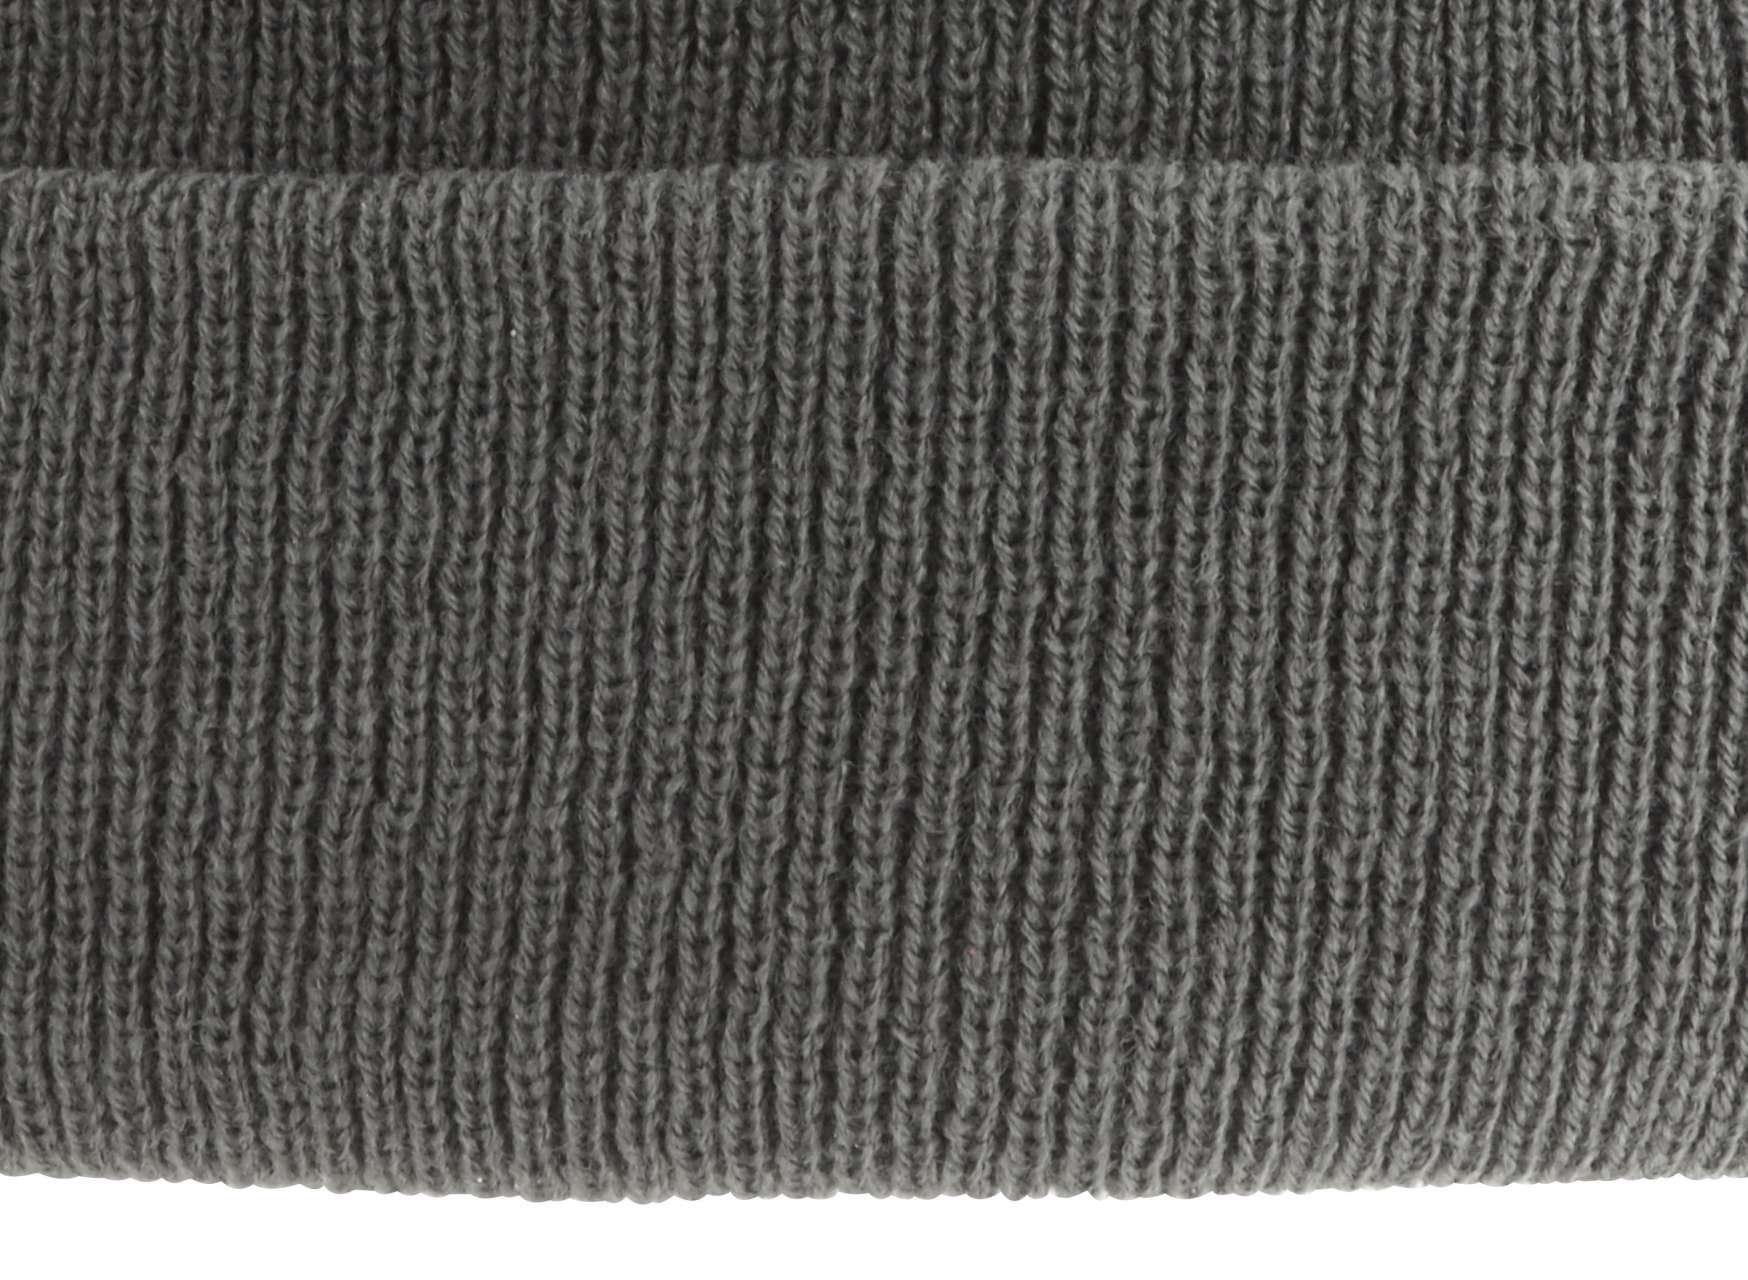 SOL'S PITTSBURGH - SOLID-COLOUR BEANIE WITH CUFFED DESIGN